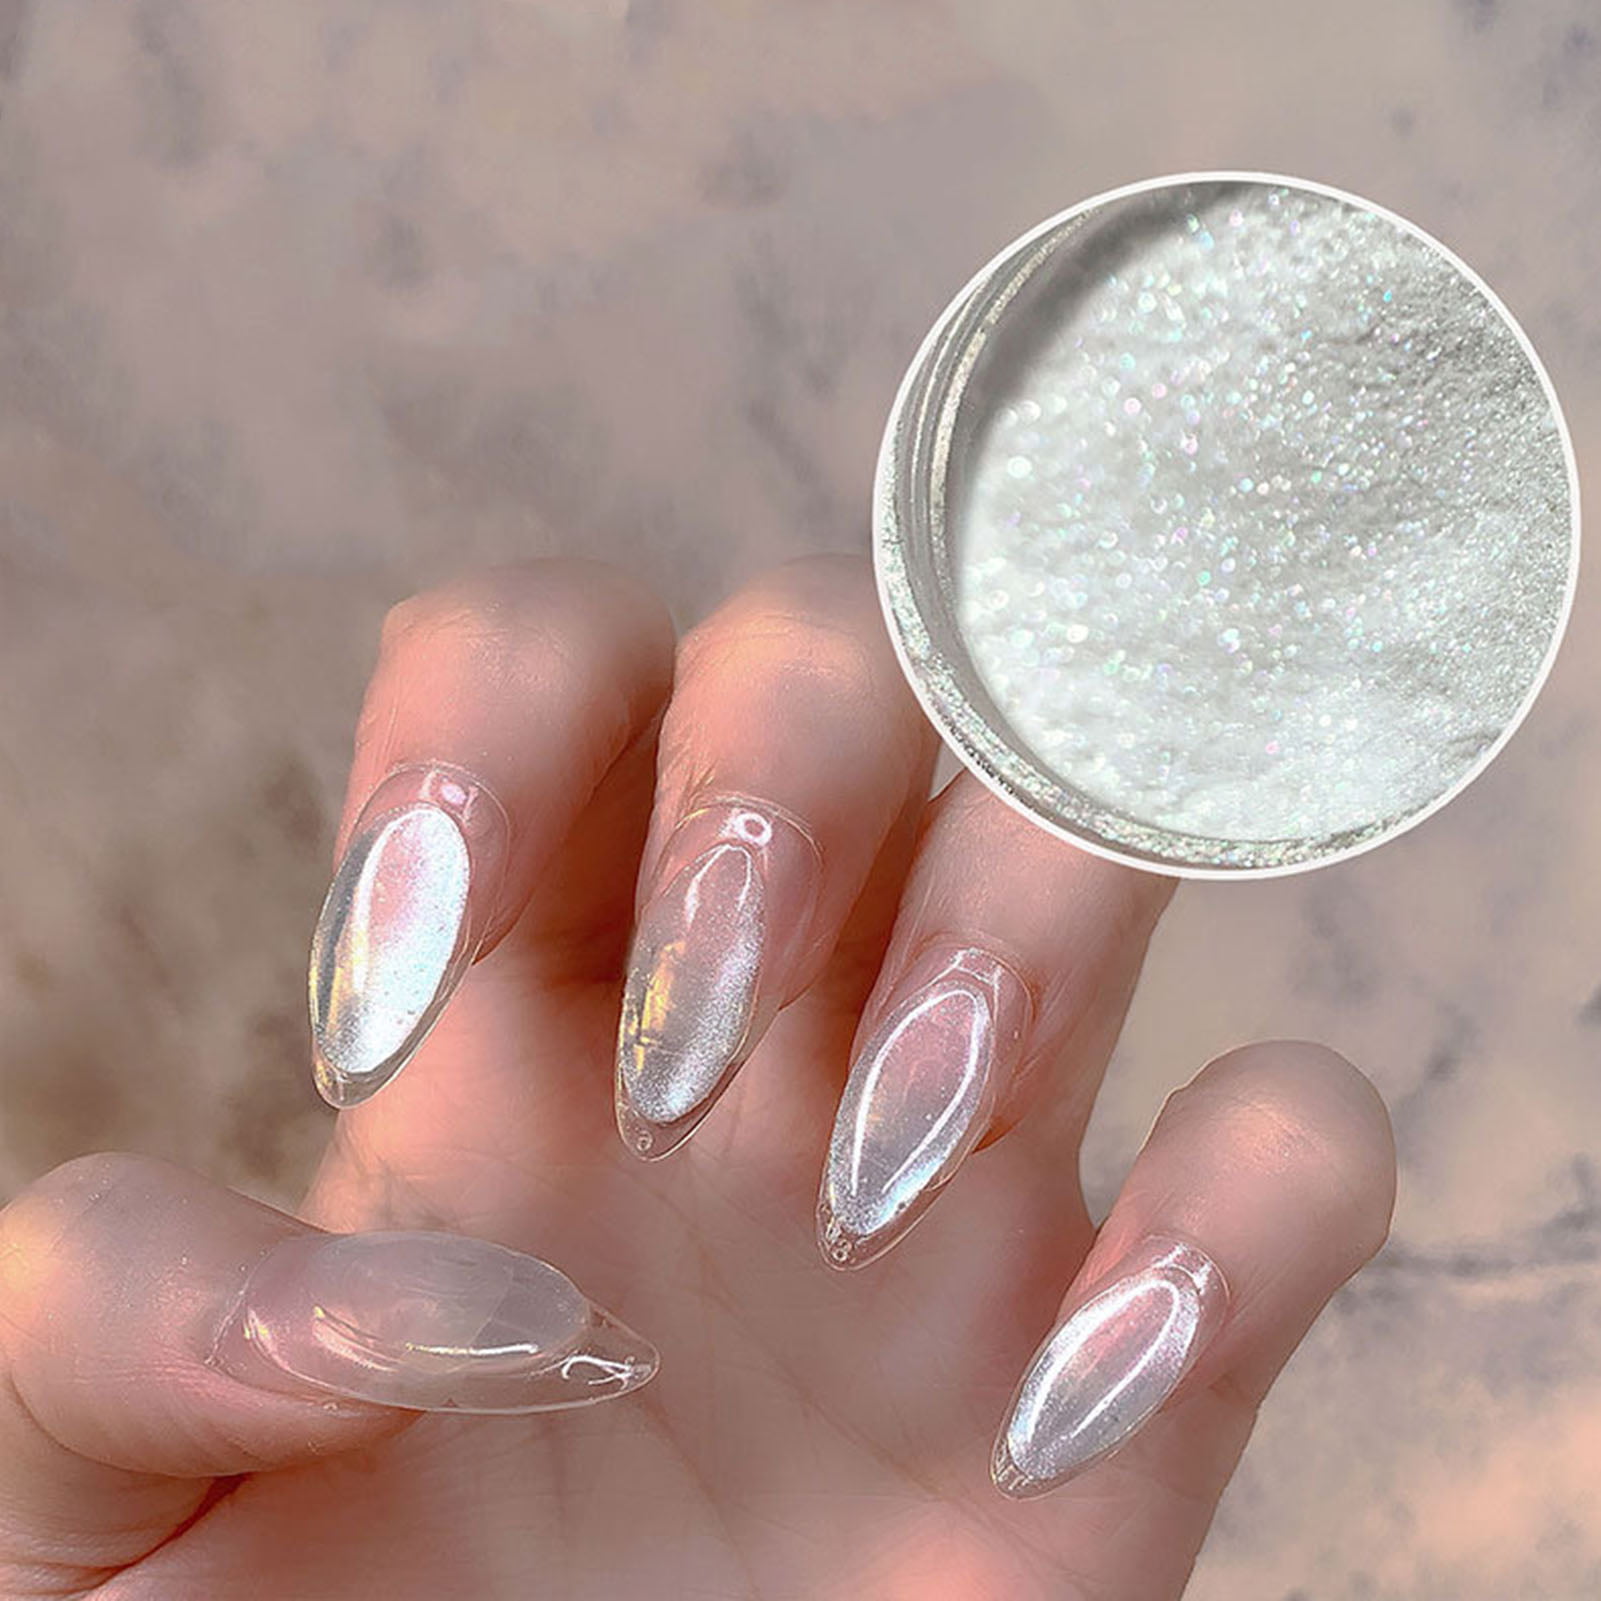 Let Your Jelly Nails Shine With Crystal-Clear Extensions | Nailpro